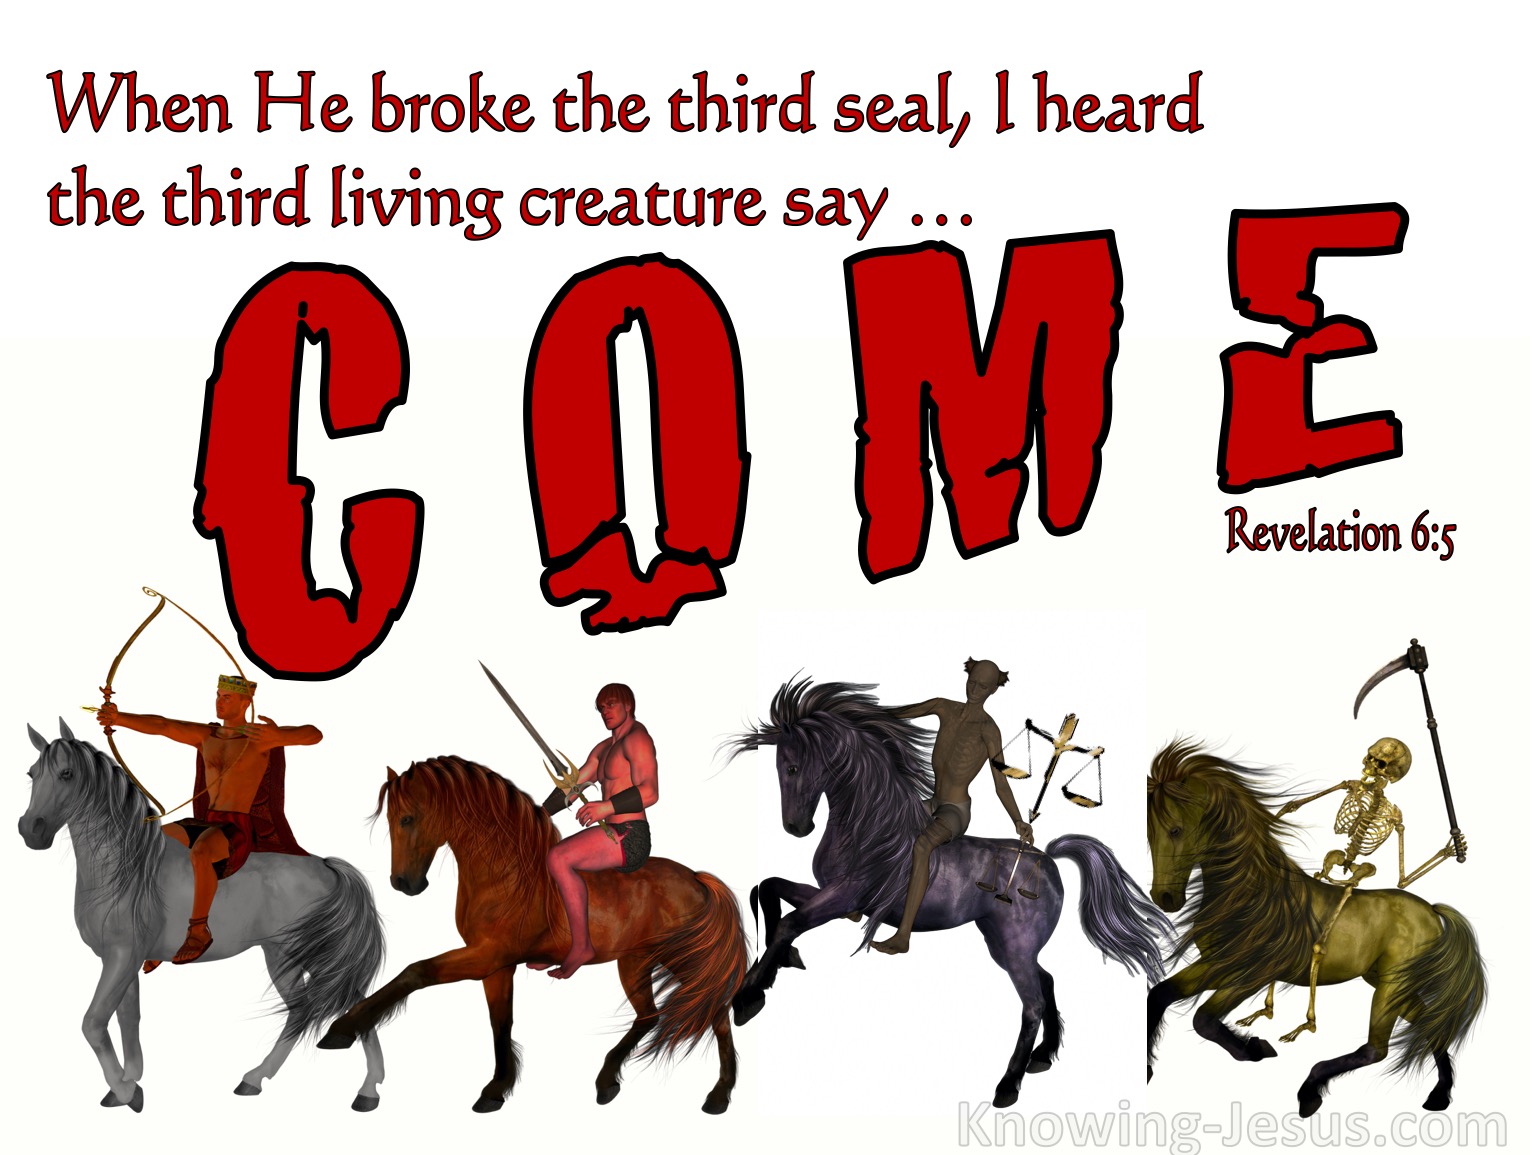 5. Exploring the Verse "And I looked, and behold a pale horse" in Revelation 6:8 - wide 7